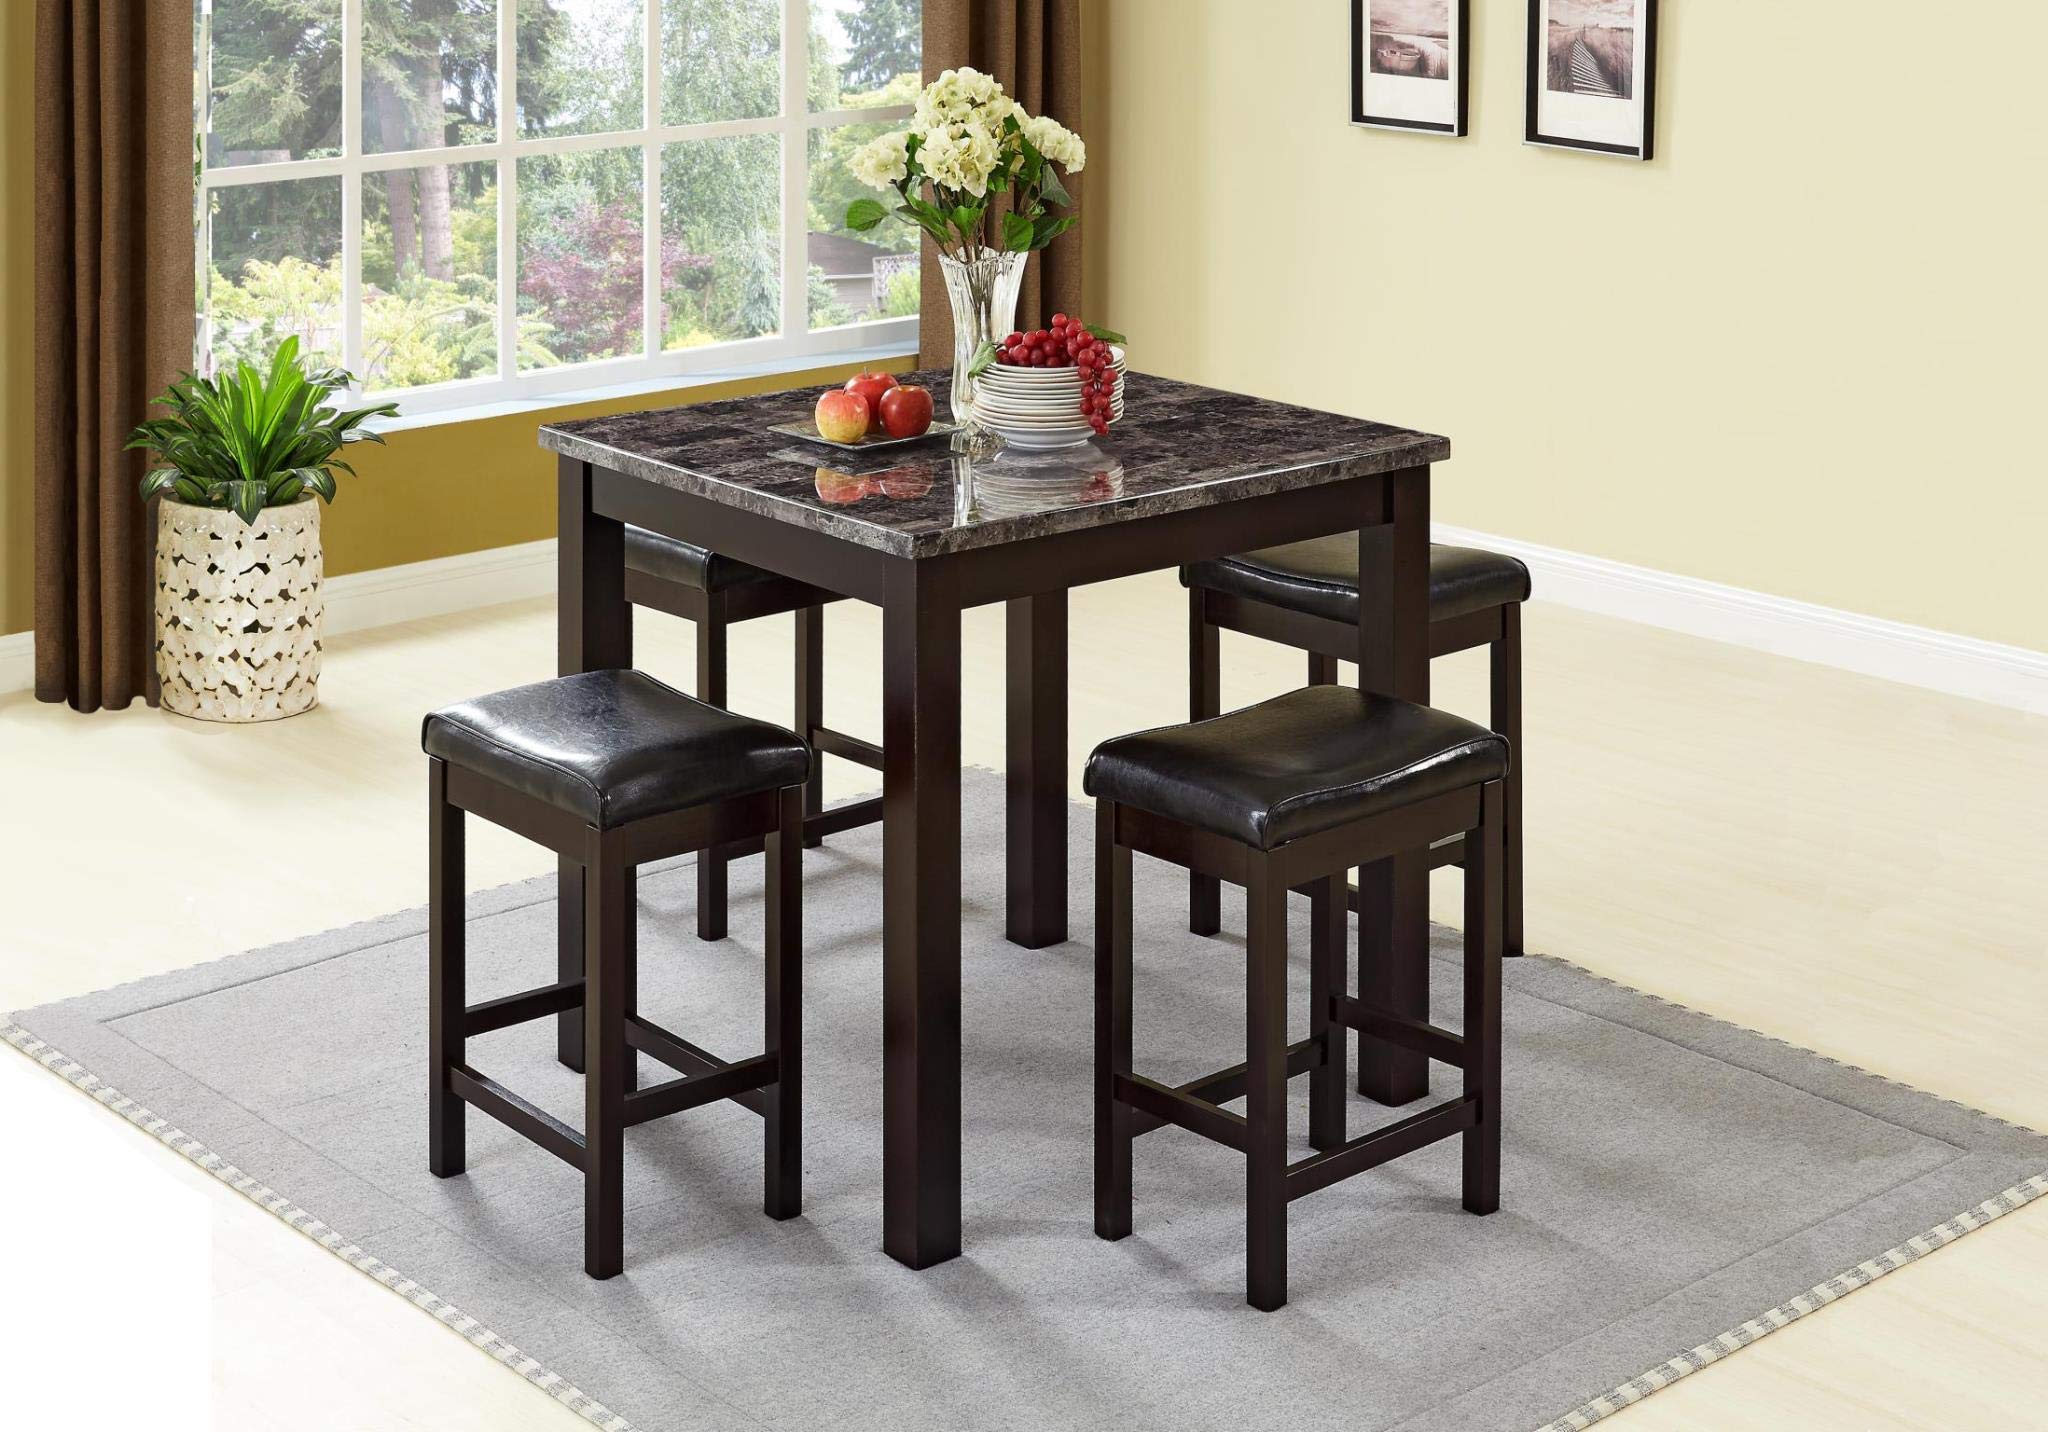 GTU Furniture 5Pc Faux Dark Wood Marble Top Counter Height Pub Table Set (5 In1)